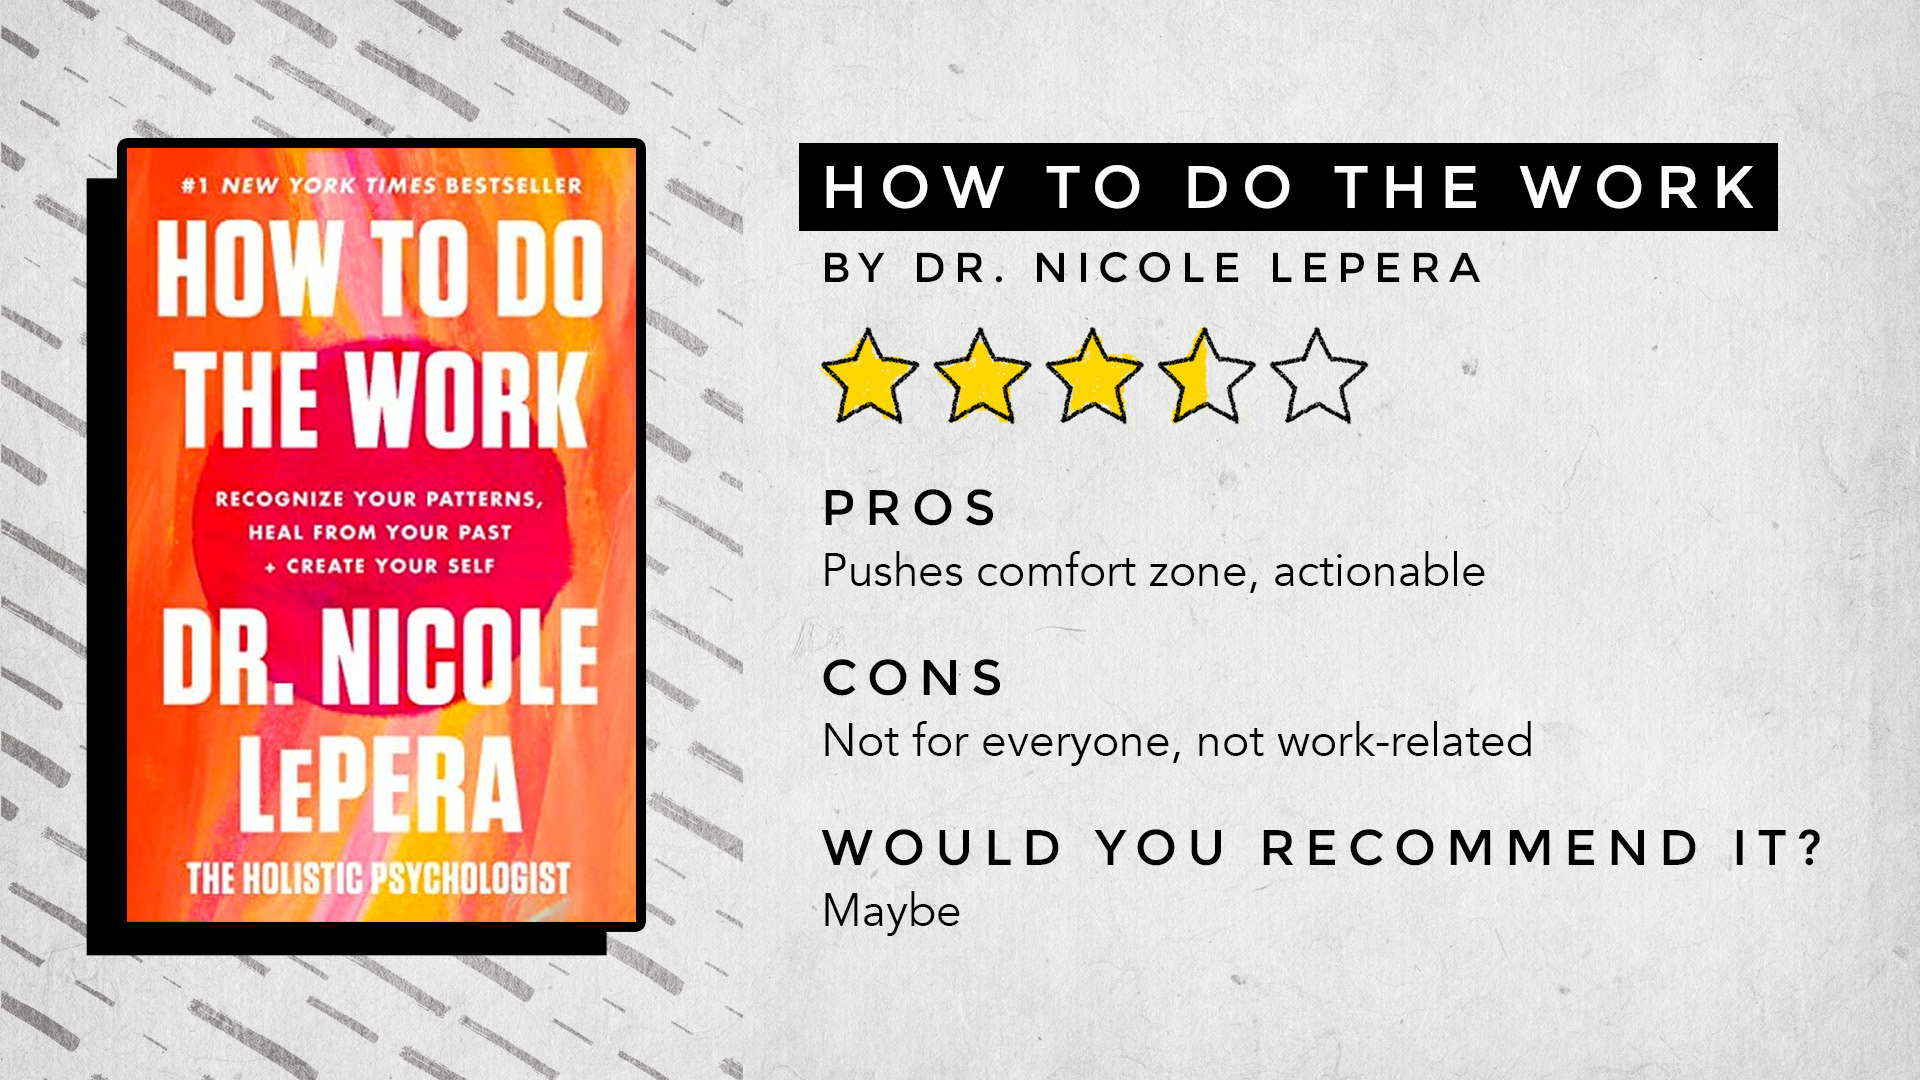 Book Review for How to Do the Work by Dr. Nicole Lepera